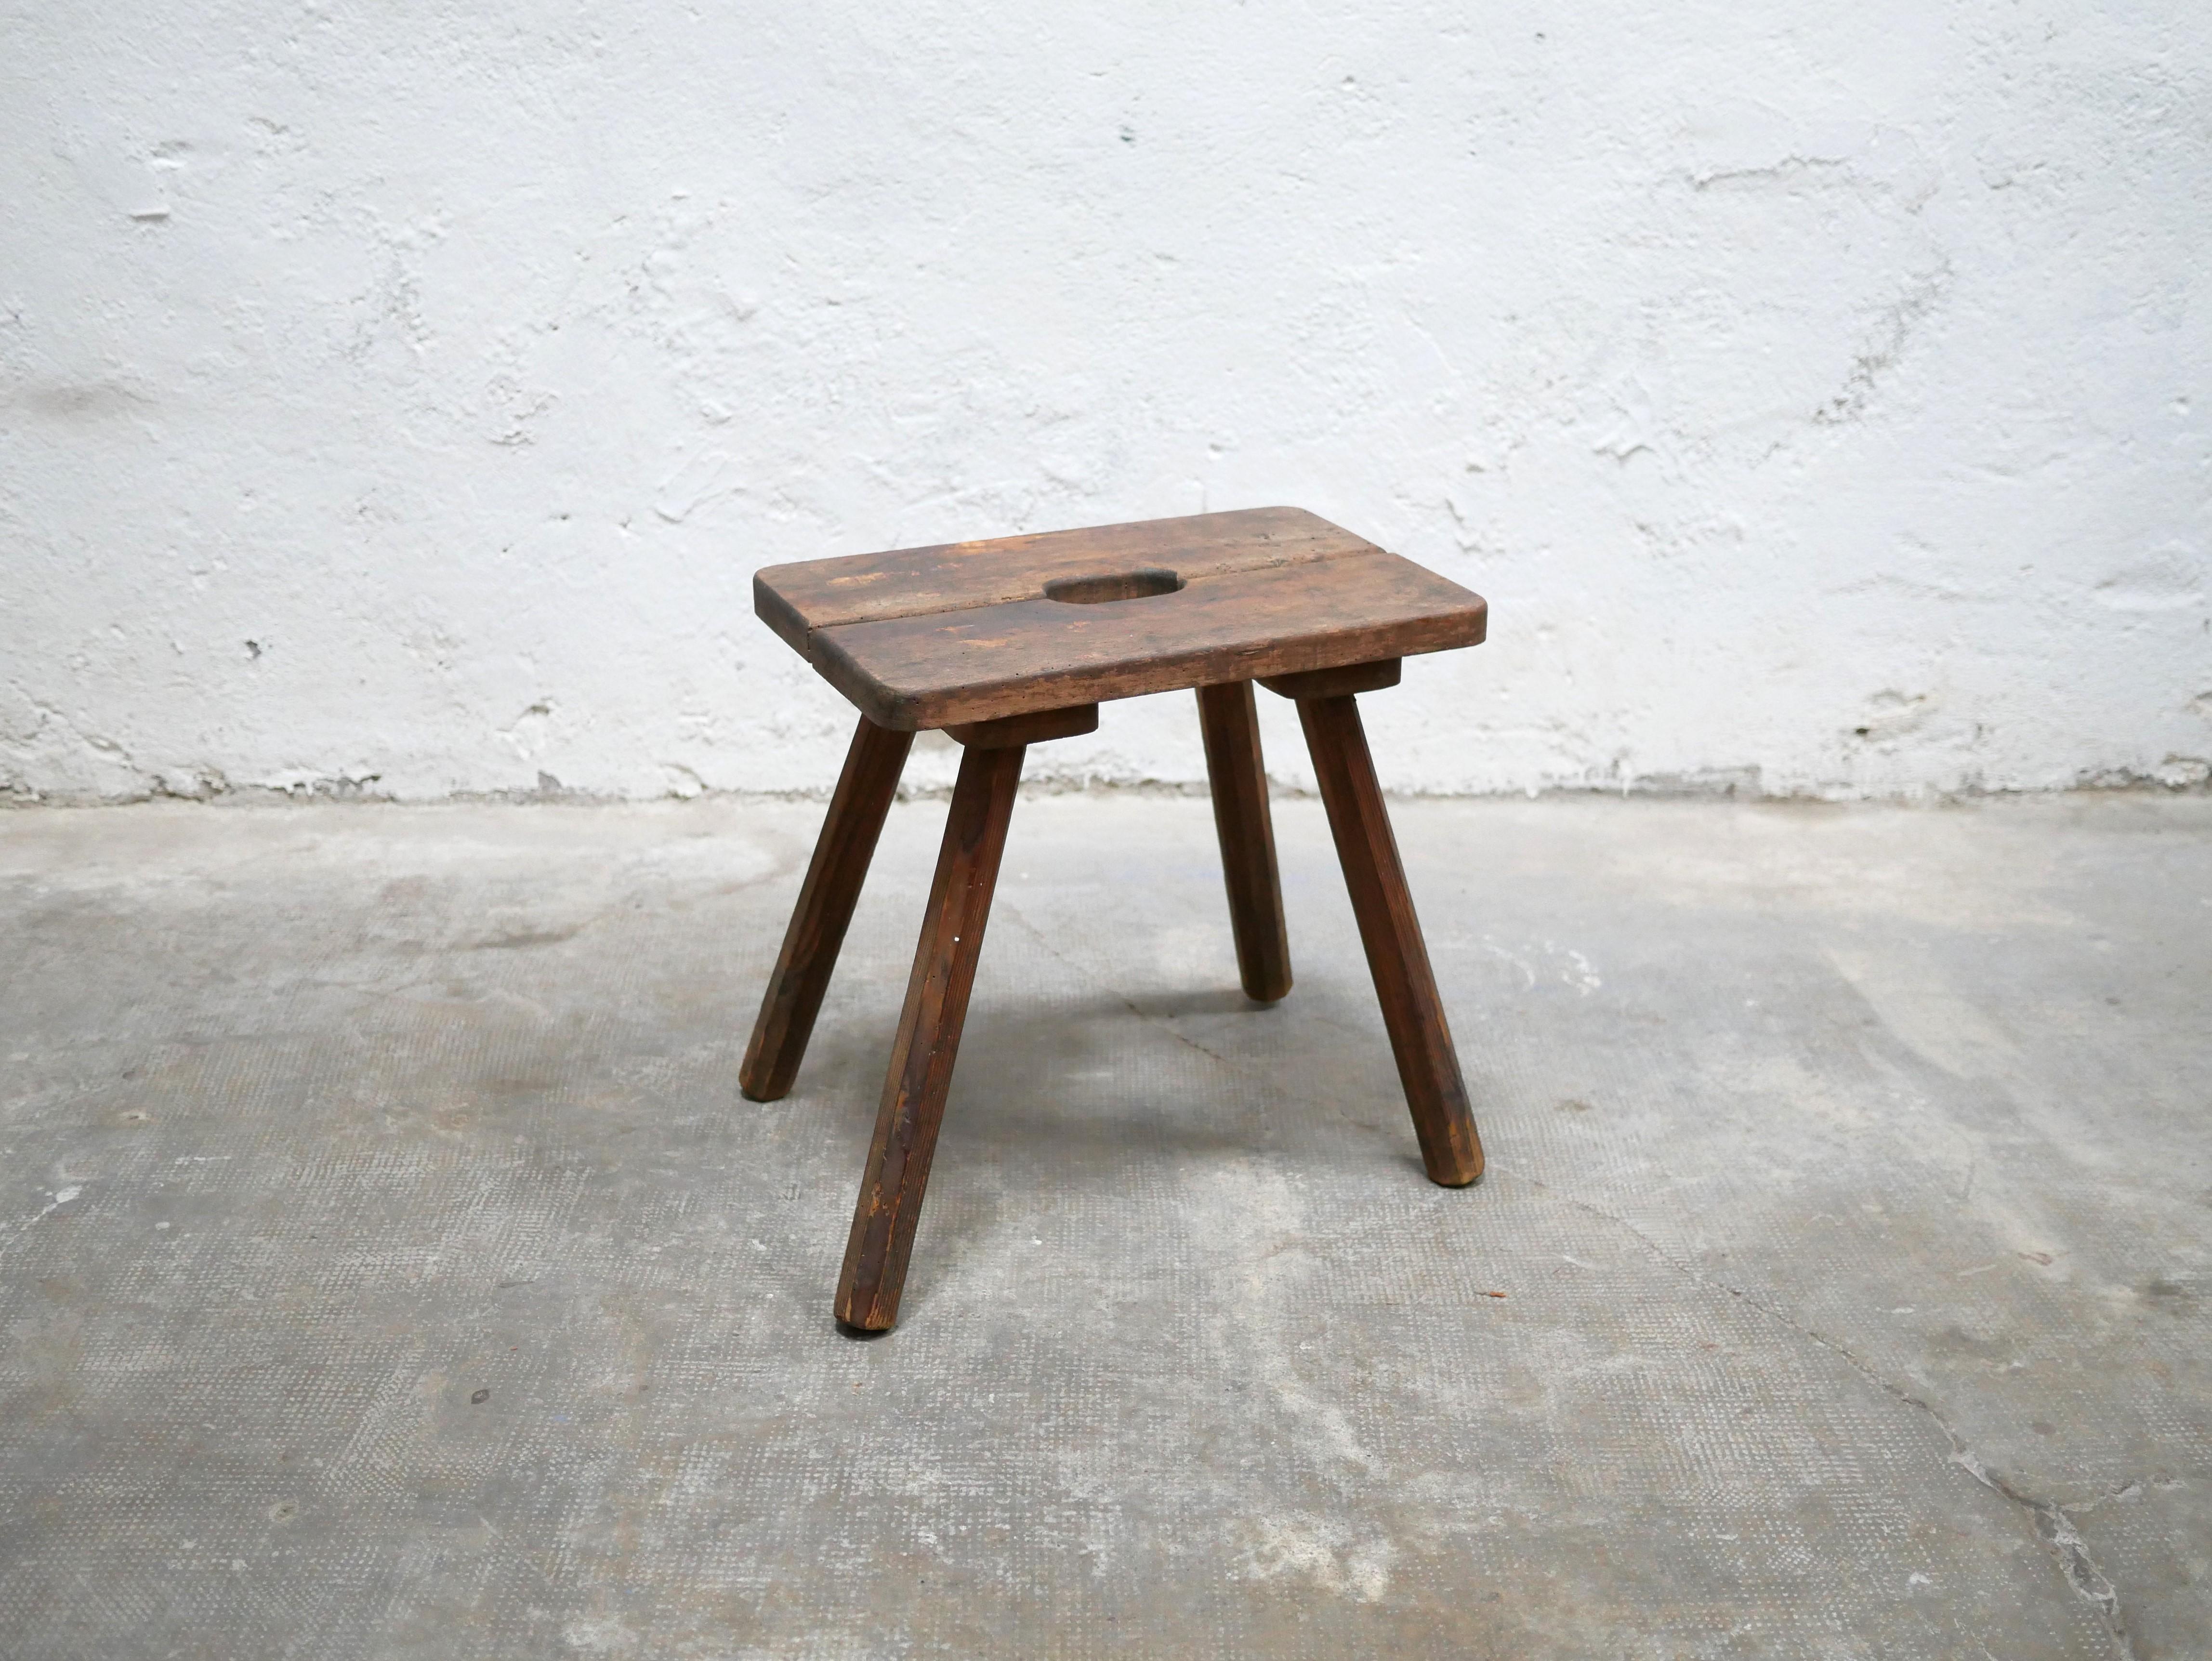 French Old wooden farm stool